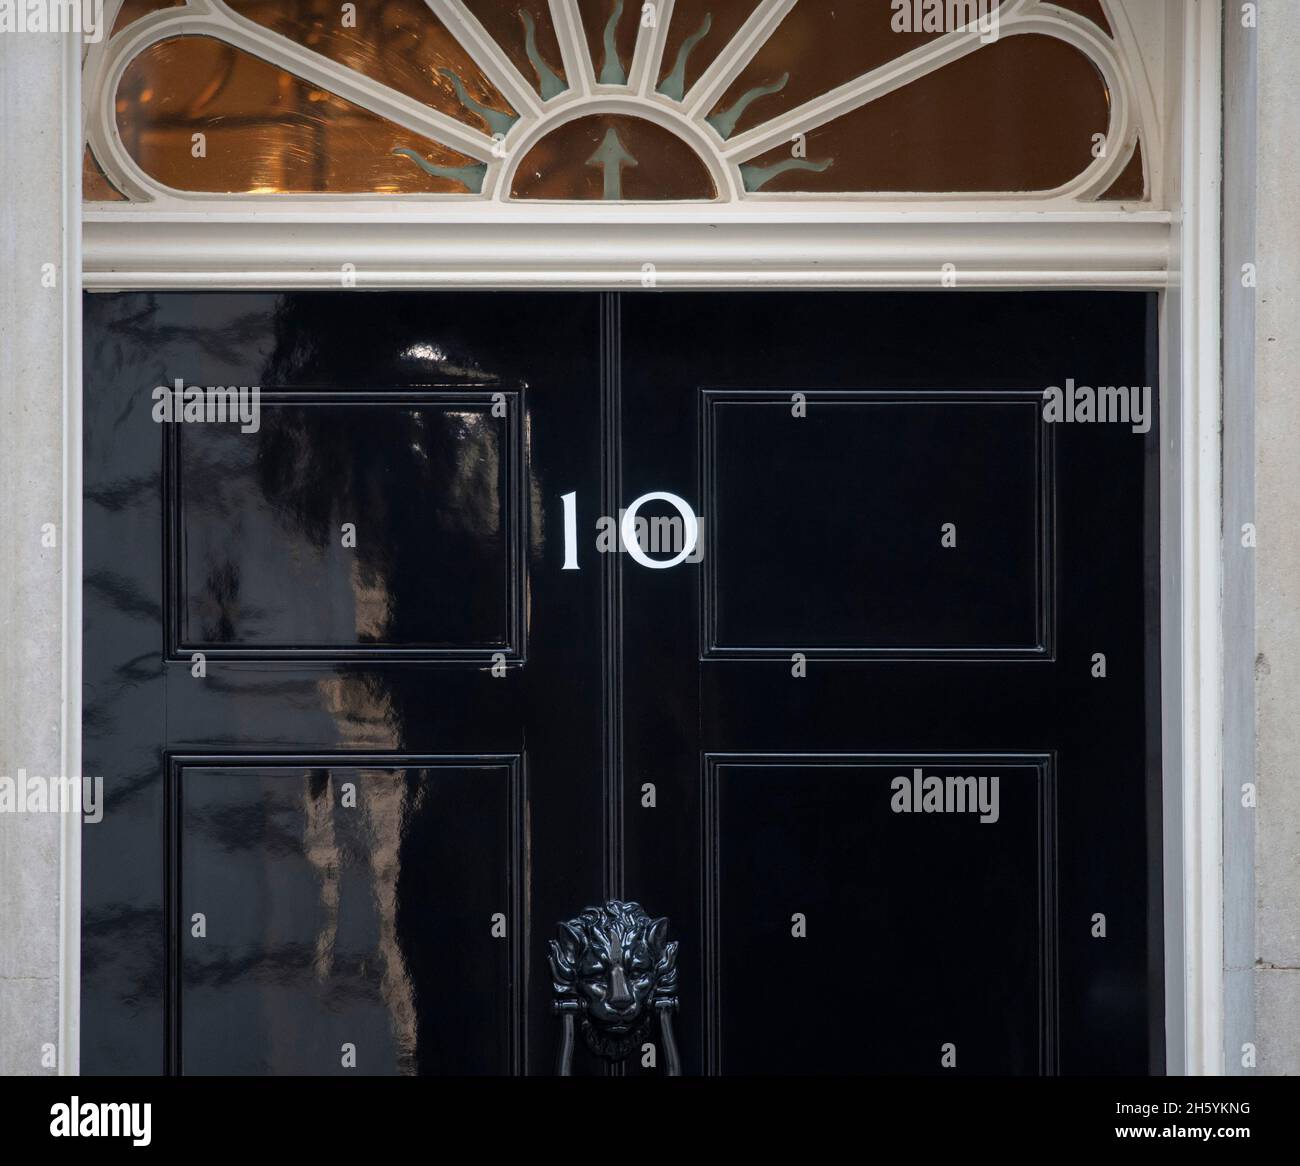 Frontage of 10 Downing Street in Westminster, central London. Home of the British Prime Minister. Credit: malcolm Park/Alamy Stock Photo